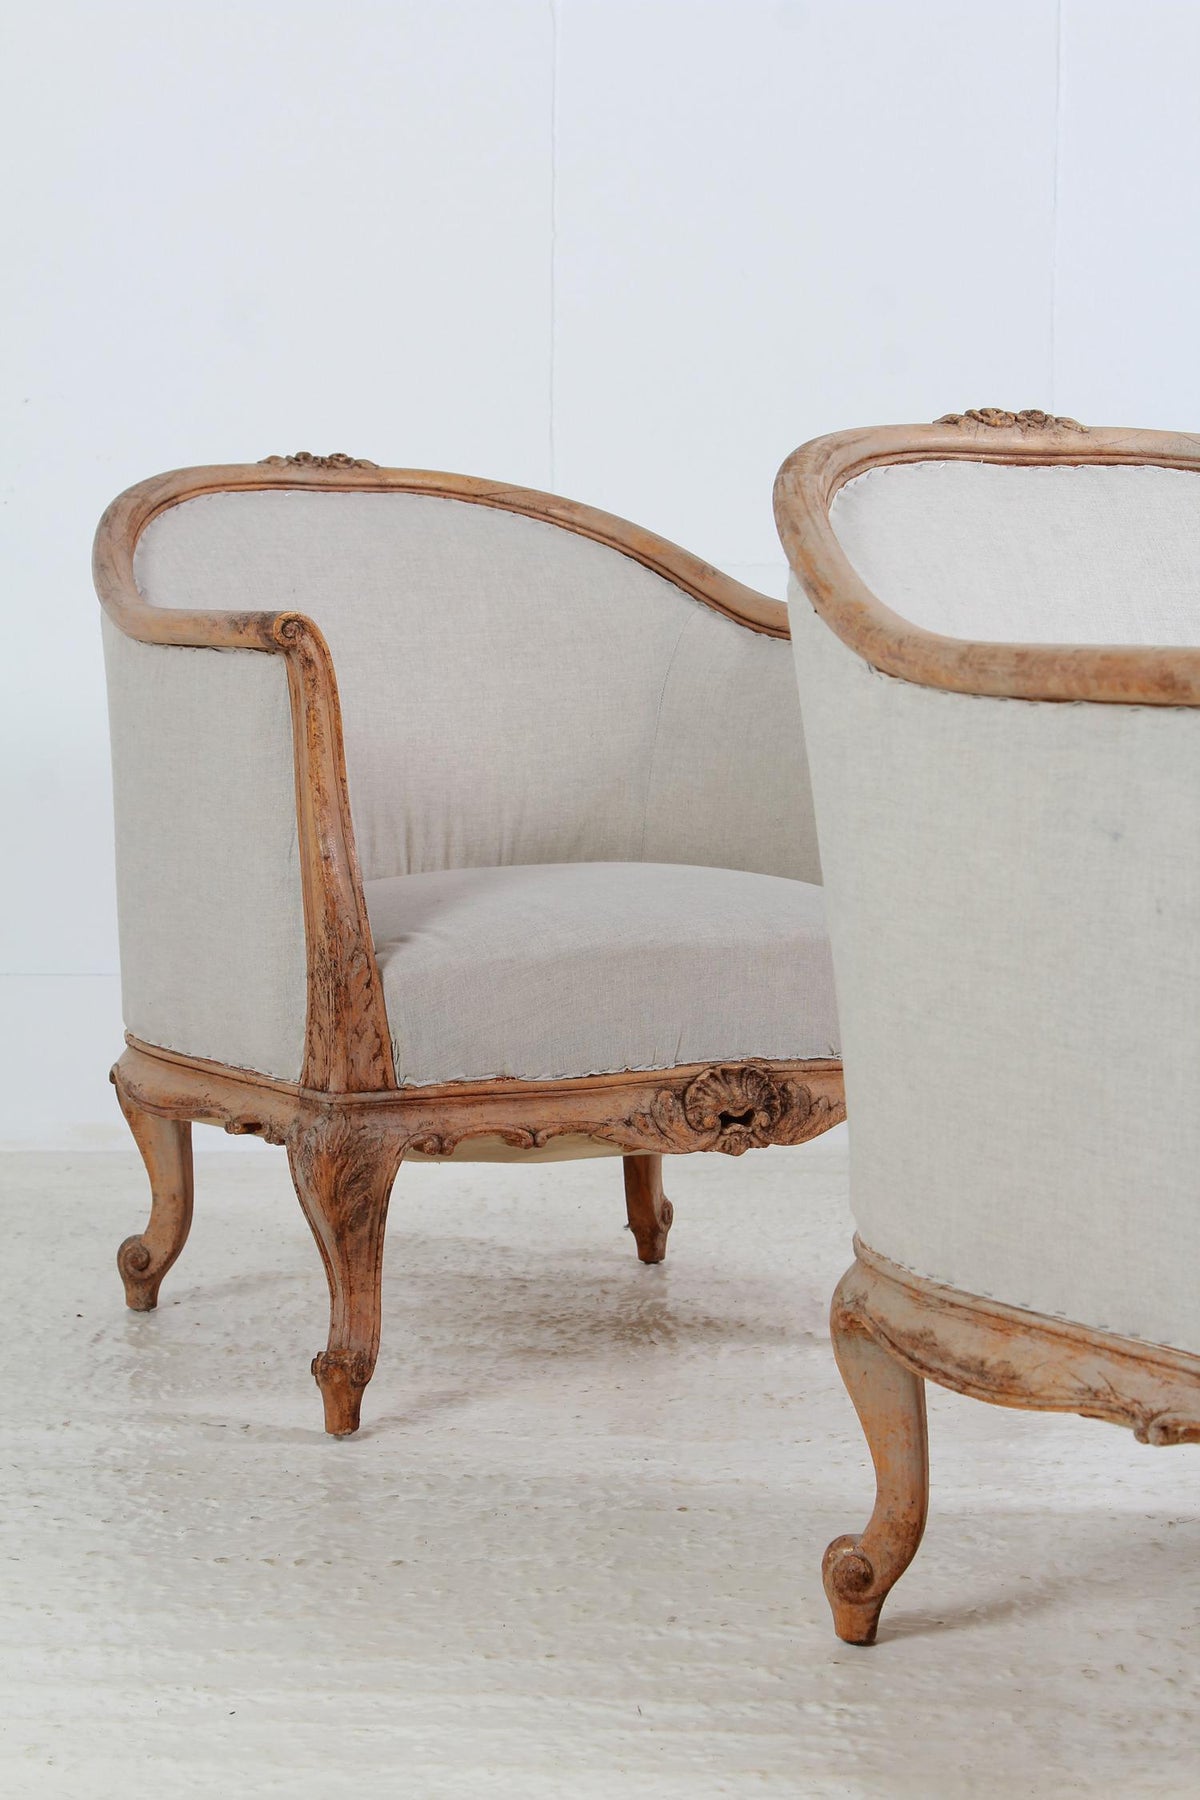 Exquisite Pair of Swedish Barrel Back Bergere Armchairs in the Original Patina